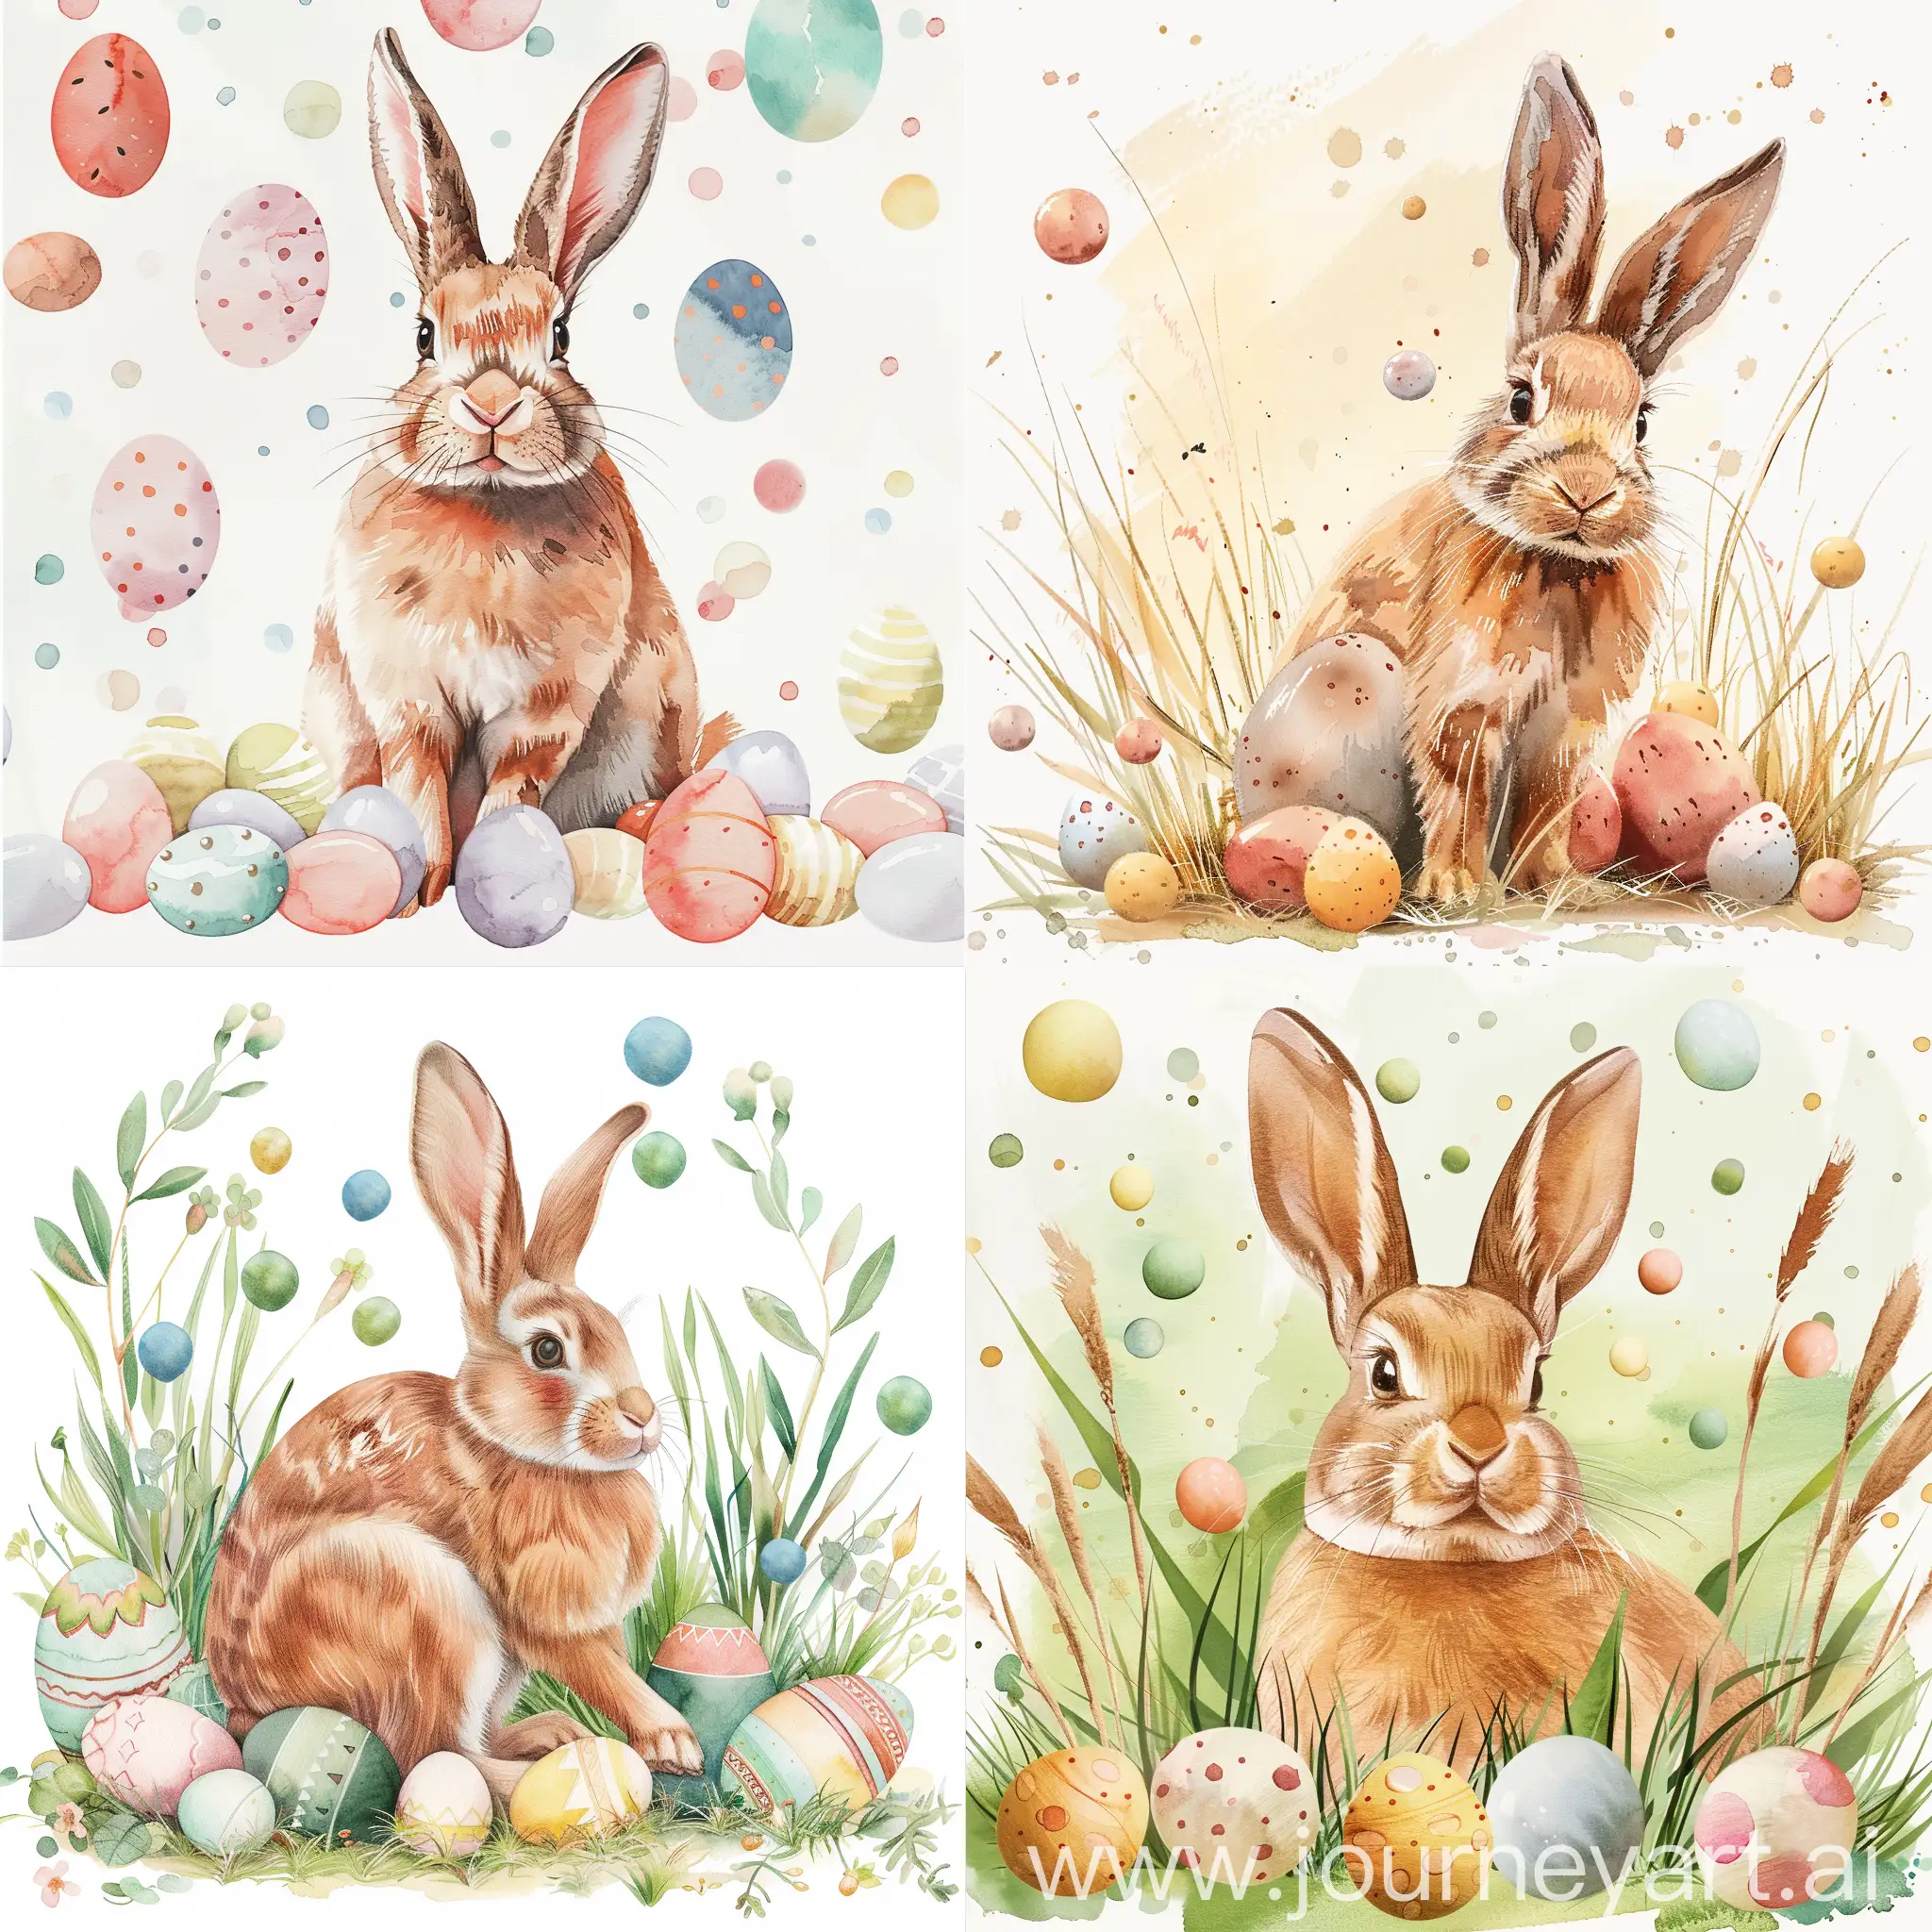 Easter-Watercolor-Card-Featuring-Bunny-Colorful-Balls-and-Eggs